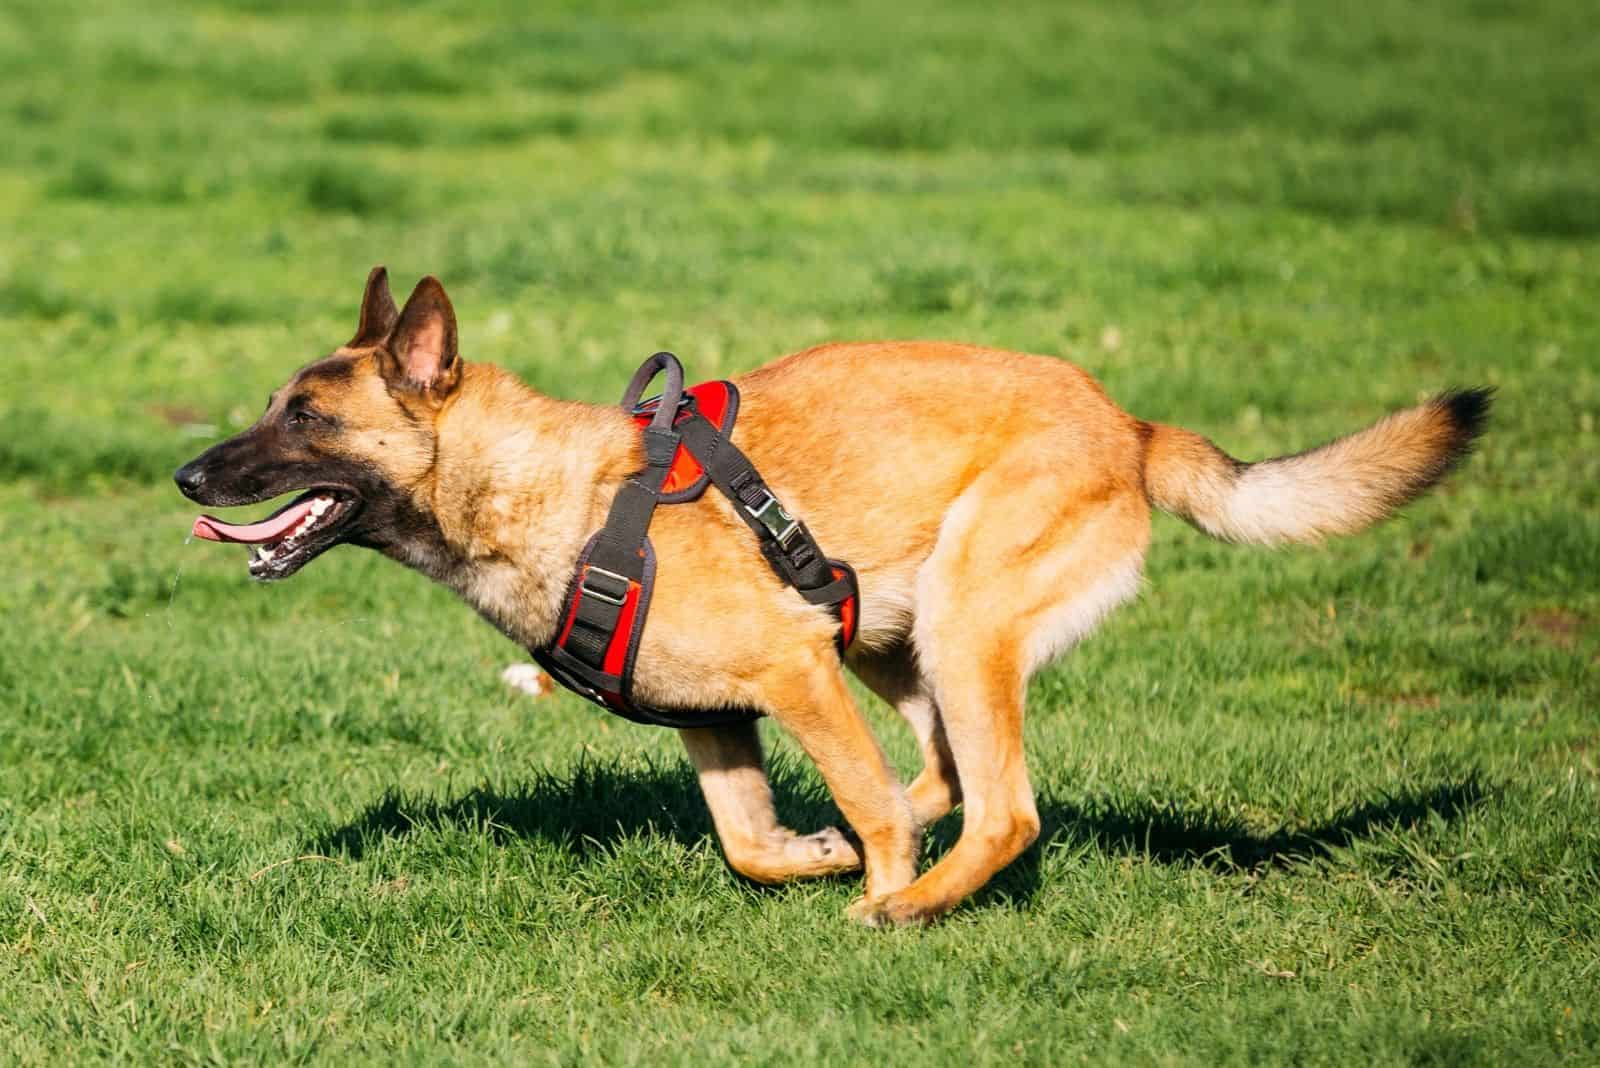 Malinois Dog Fast Running Outdoors In Green Summer Grass At Training